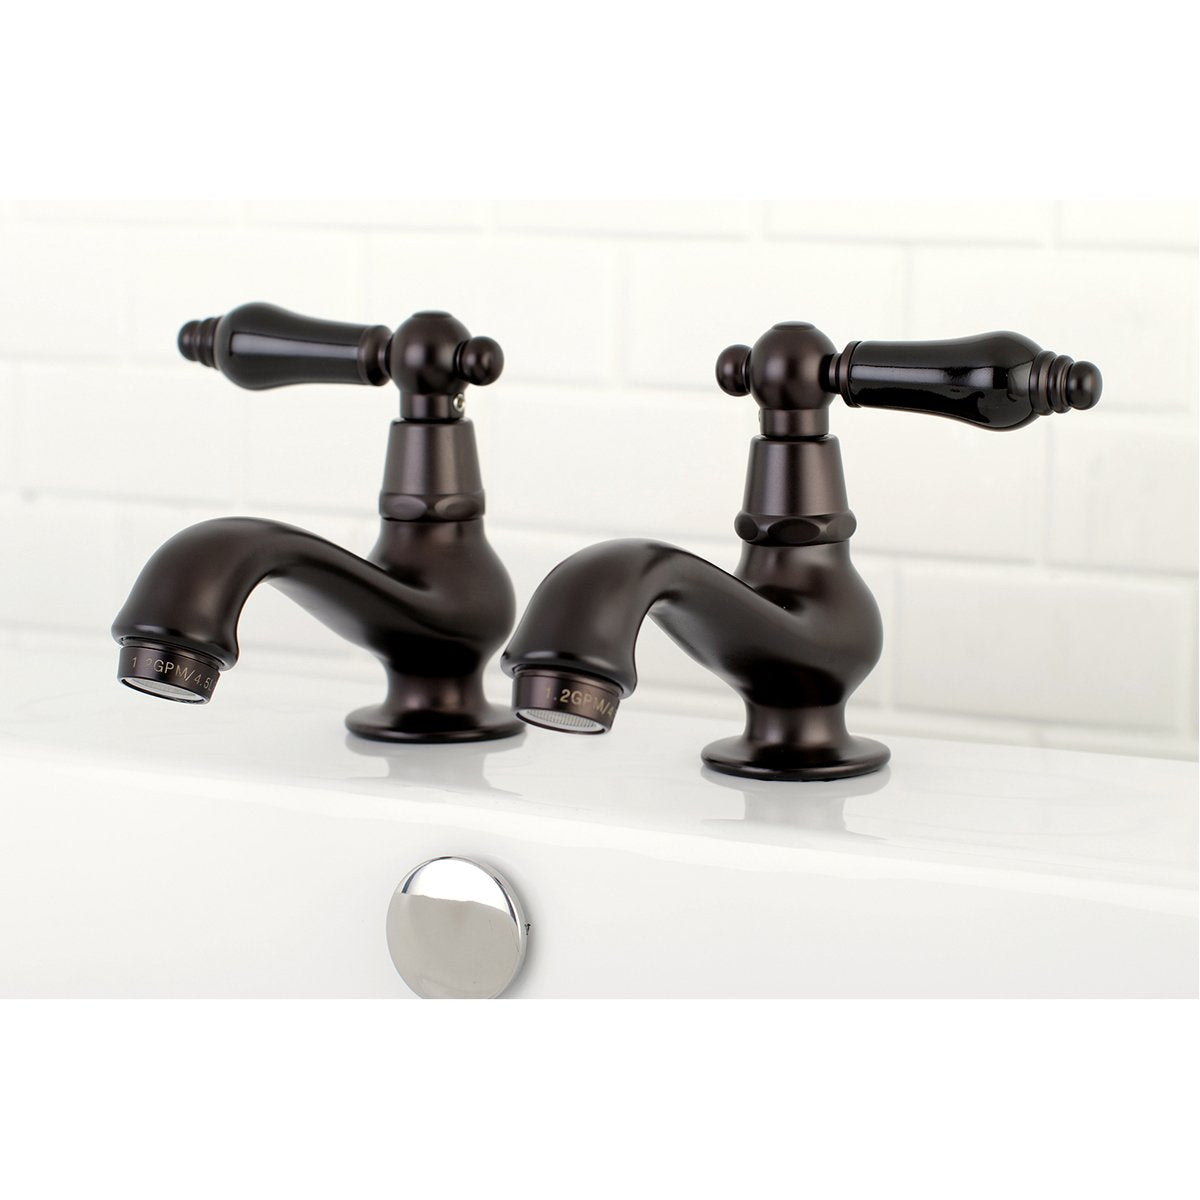 Kingston Brass Duchess Basin Tap Faucet with Cross Handle